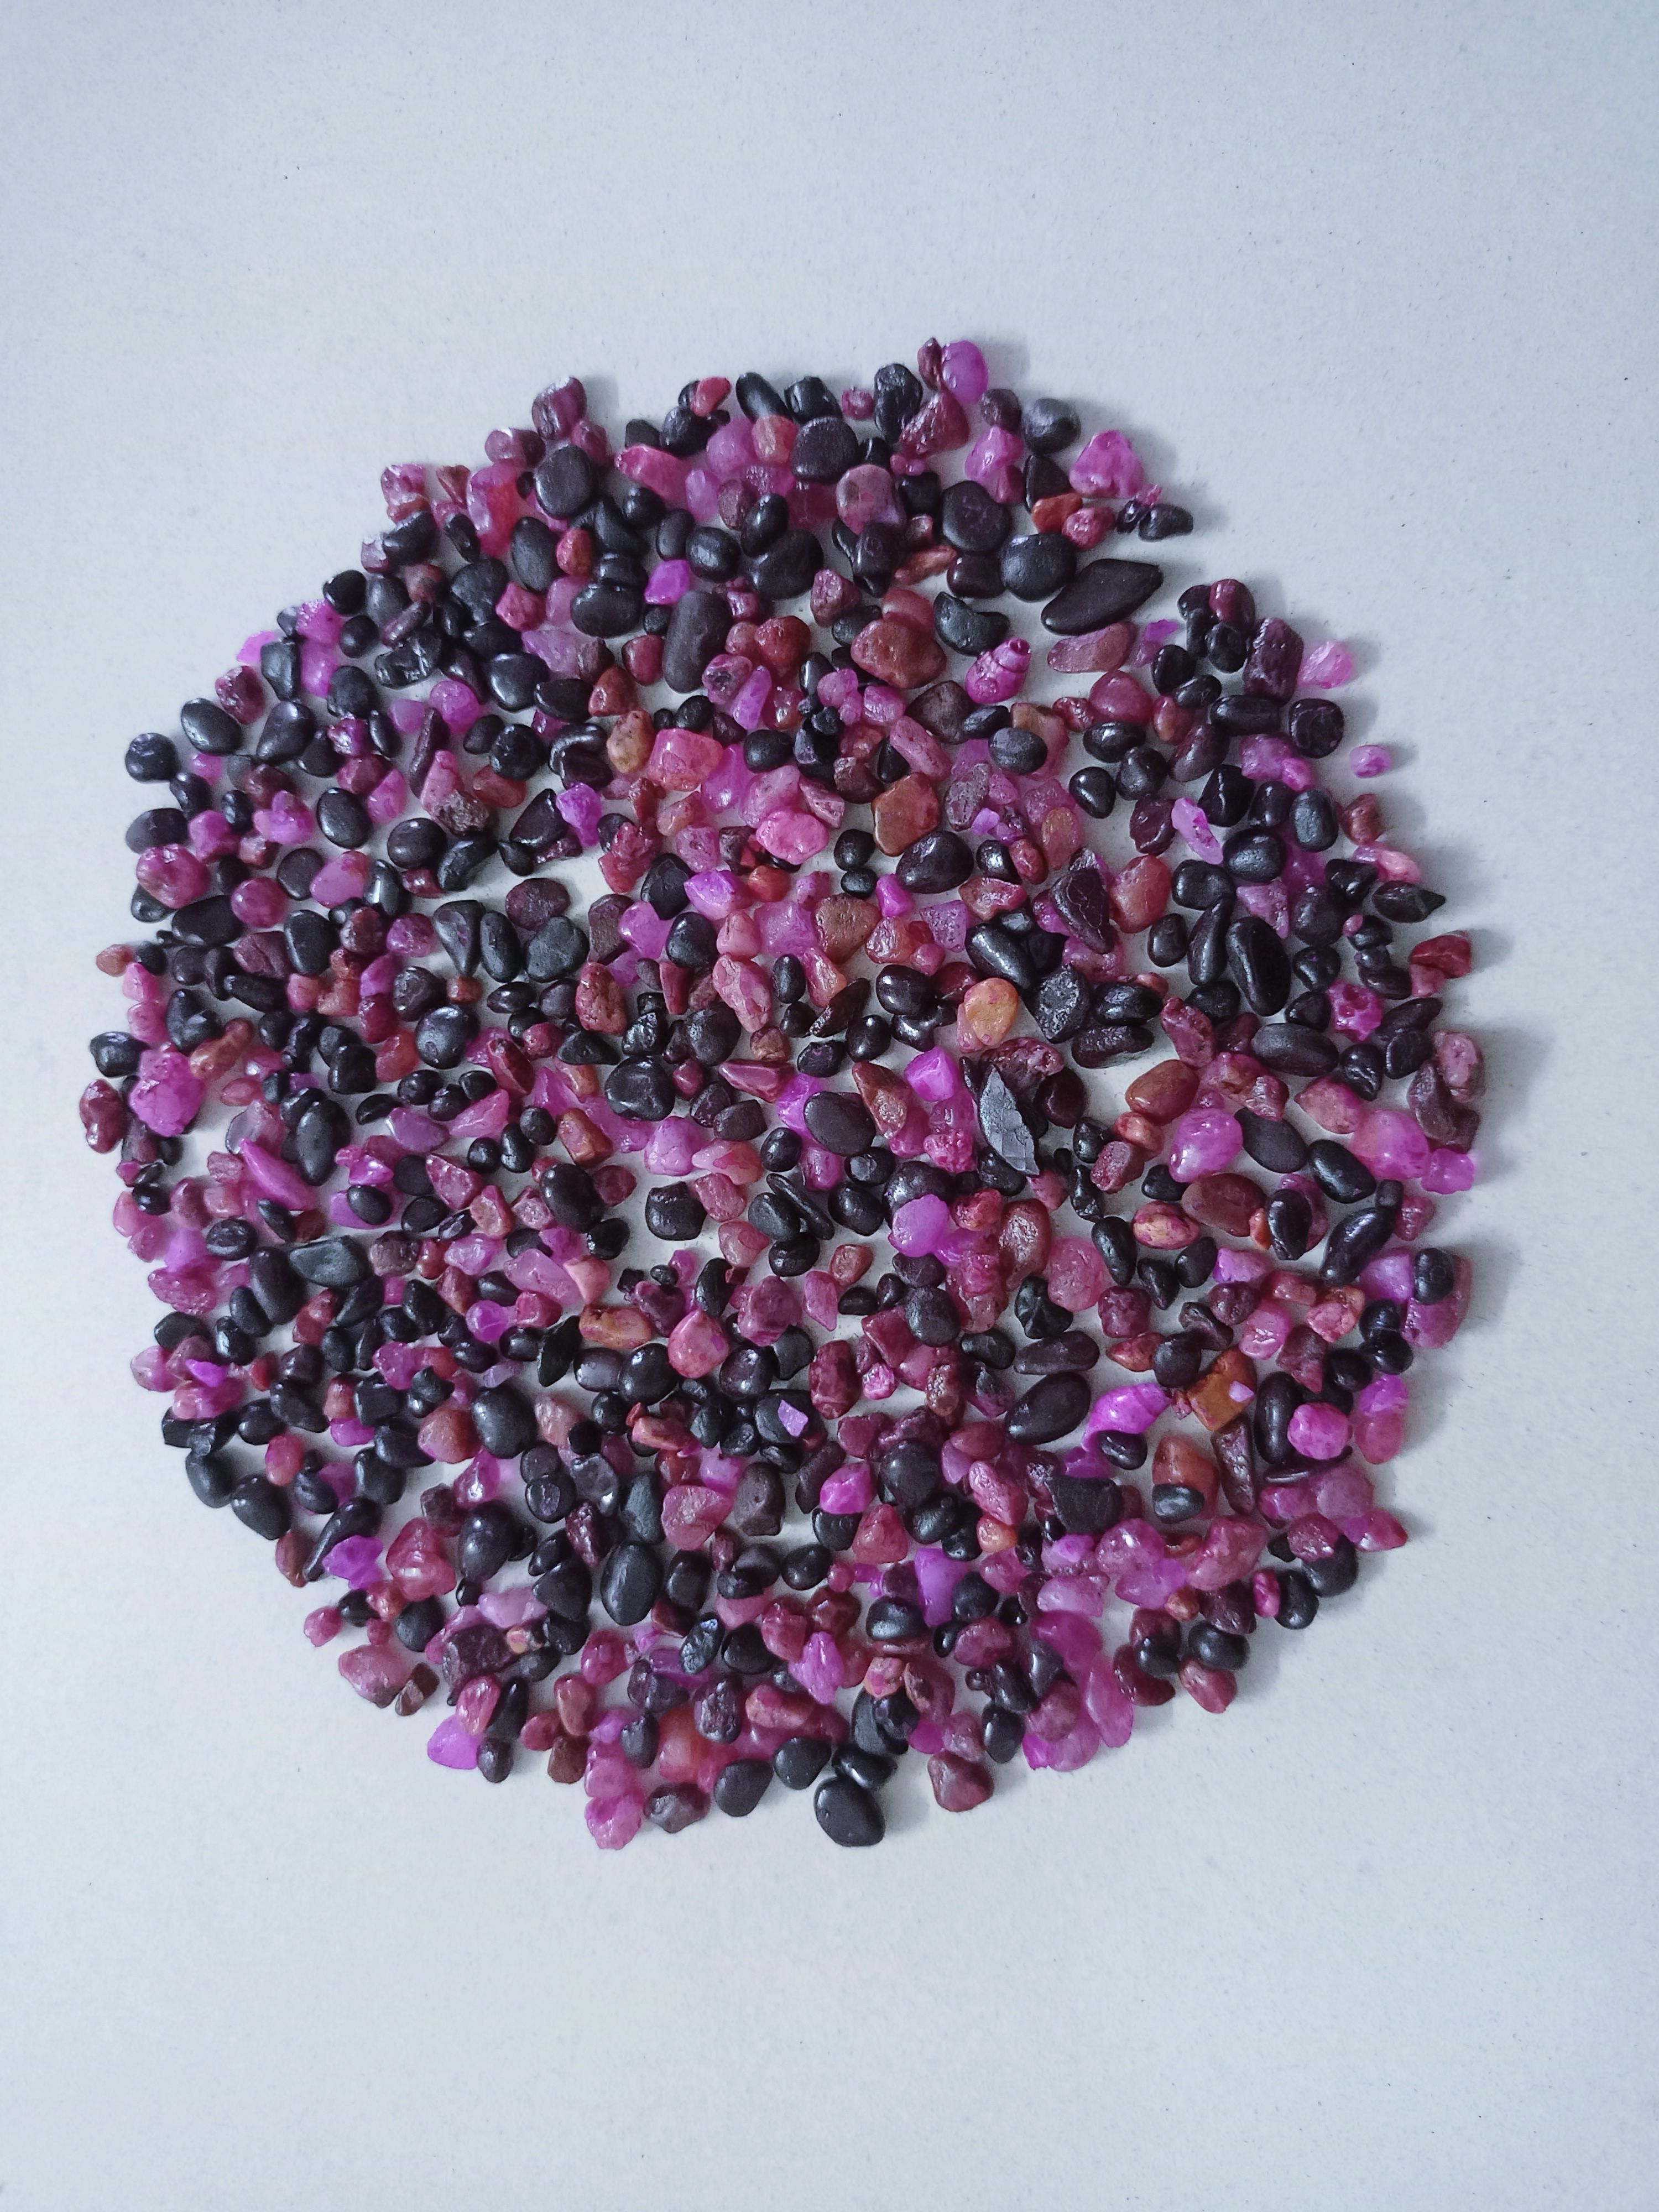 Gravel Resin Bound Gravel Muti Colored Crushed Stone or Gravel for Building Concrete Marble Floor Terrazzo